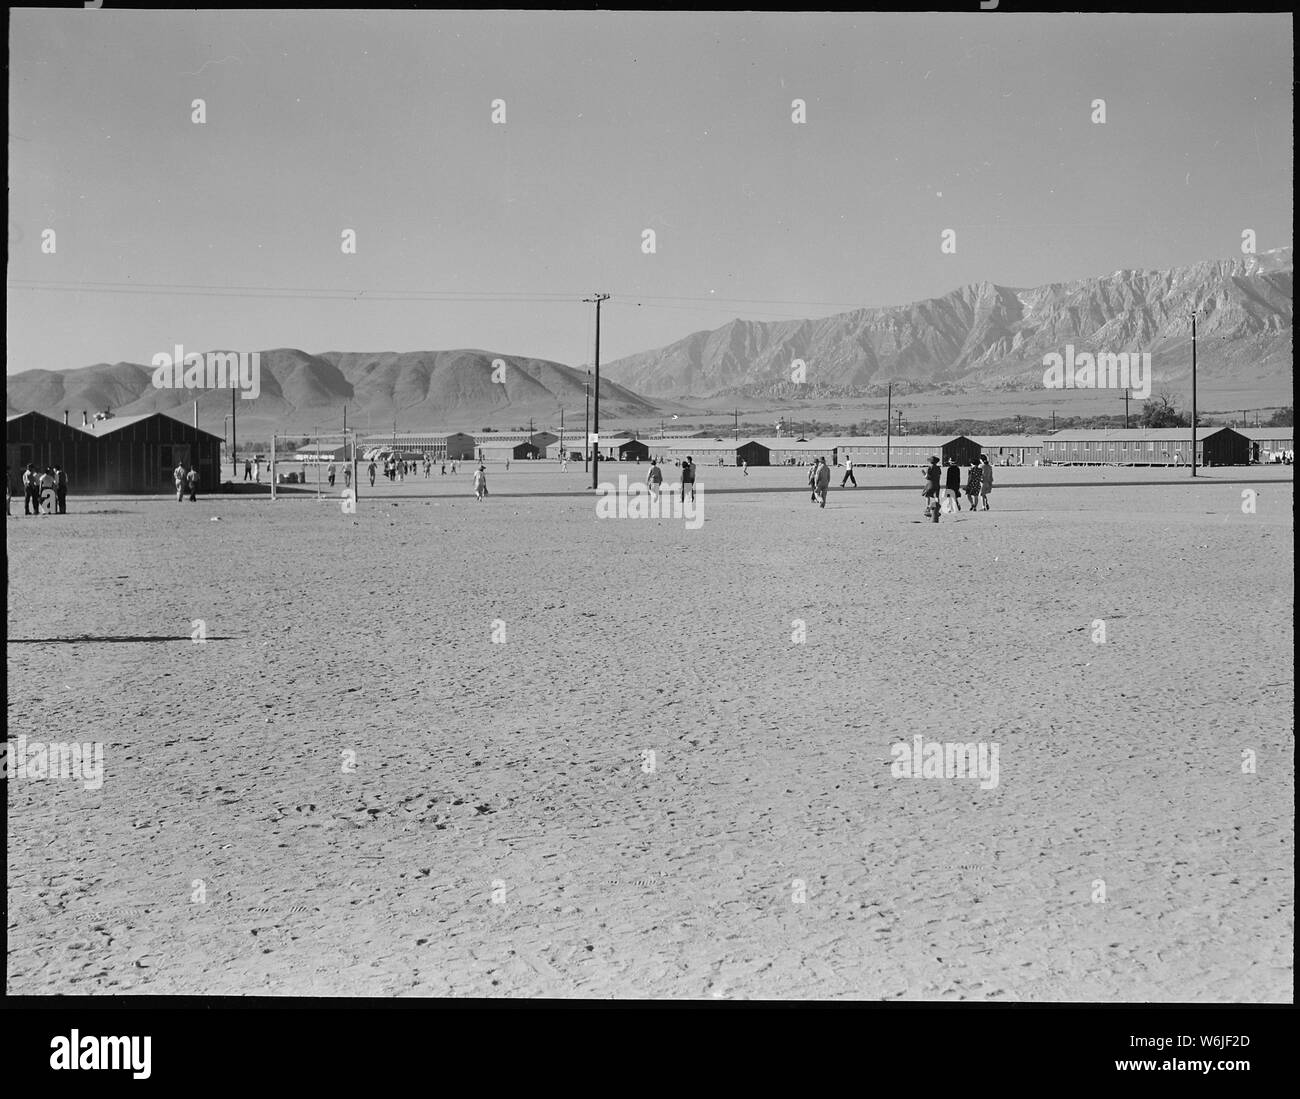 Manzanar Relocation Center, Manzanar, California. Looking southwest across the wide fire-break at t . . .; Scope and content:  The full caption for this photograph reads: Manzanar Relocation Center, Manzanar, California. Looking southwest across the wide fire-break at this War Relocation Authority center which houses 10,000 evacuees of Japanese ancestry. It is located in Owens Valley between the High Sierras and Mount Whitney, the highest peak in the United States. Stock Photo